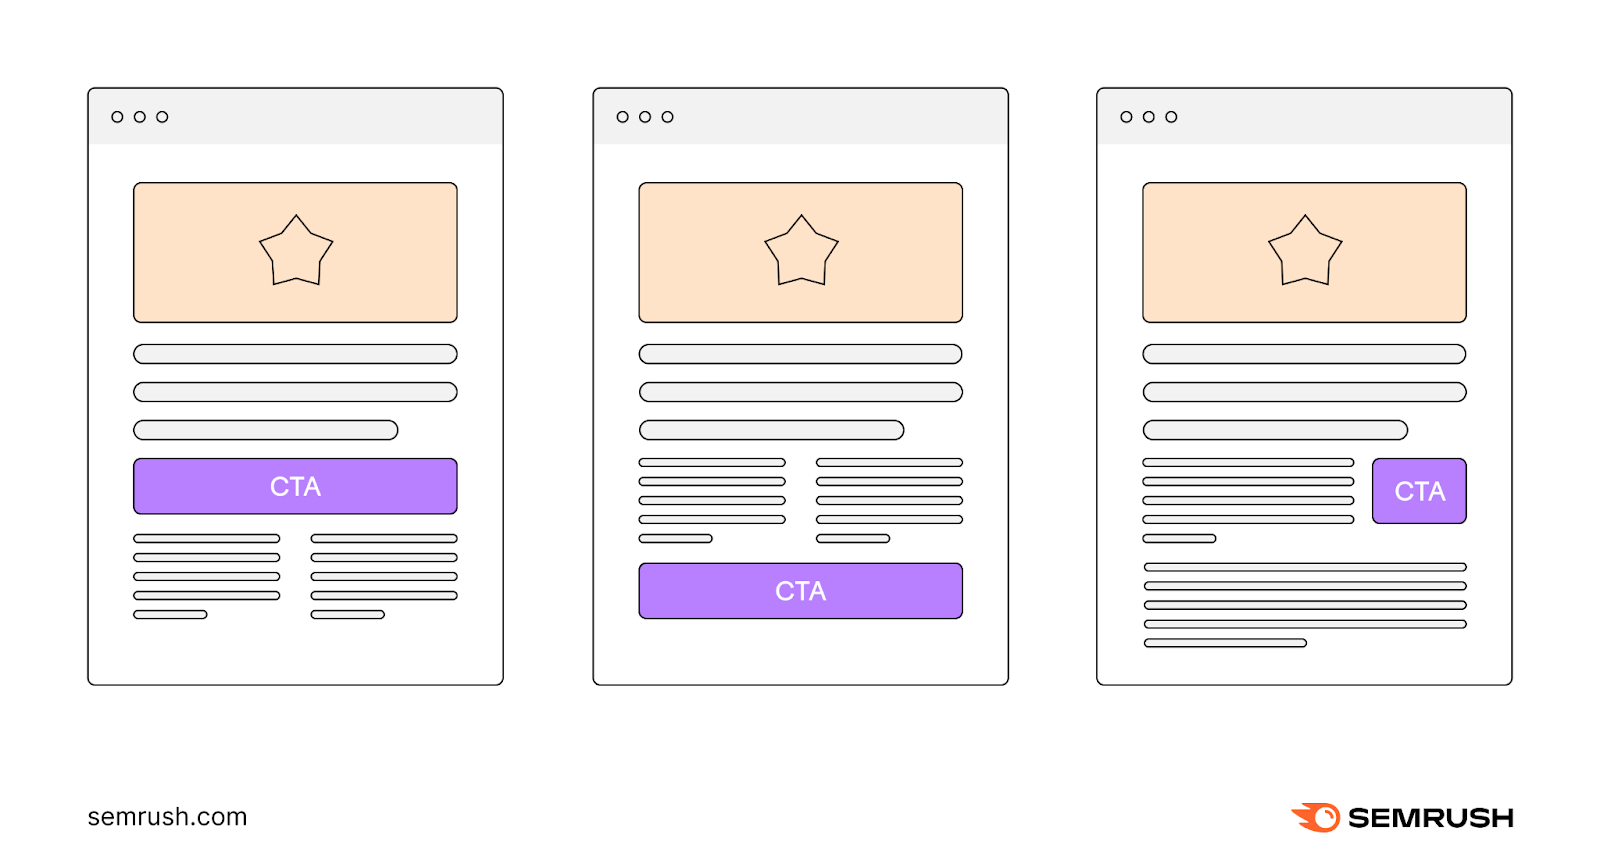 A visual showing different CTA placements on the page